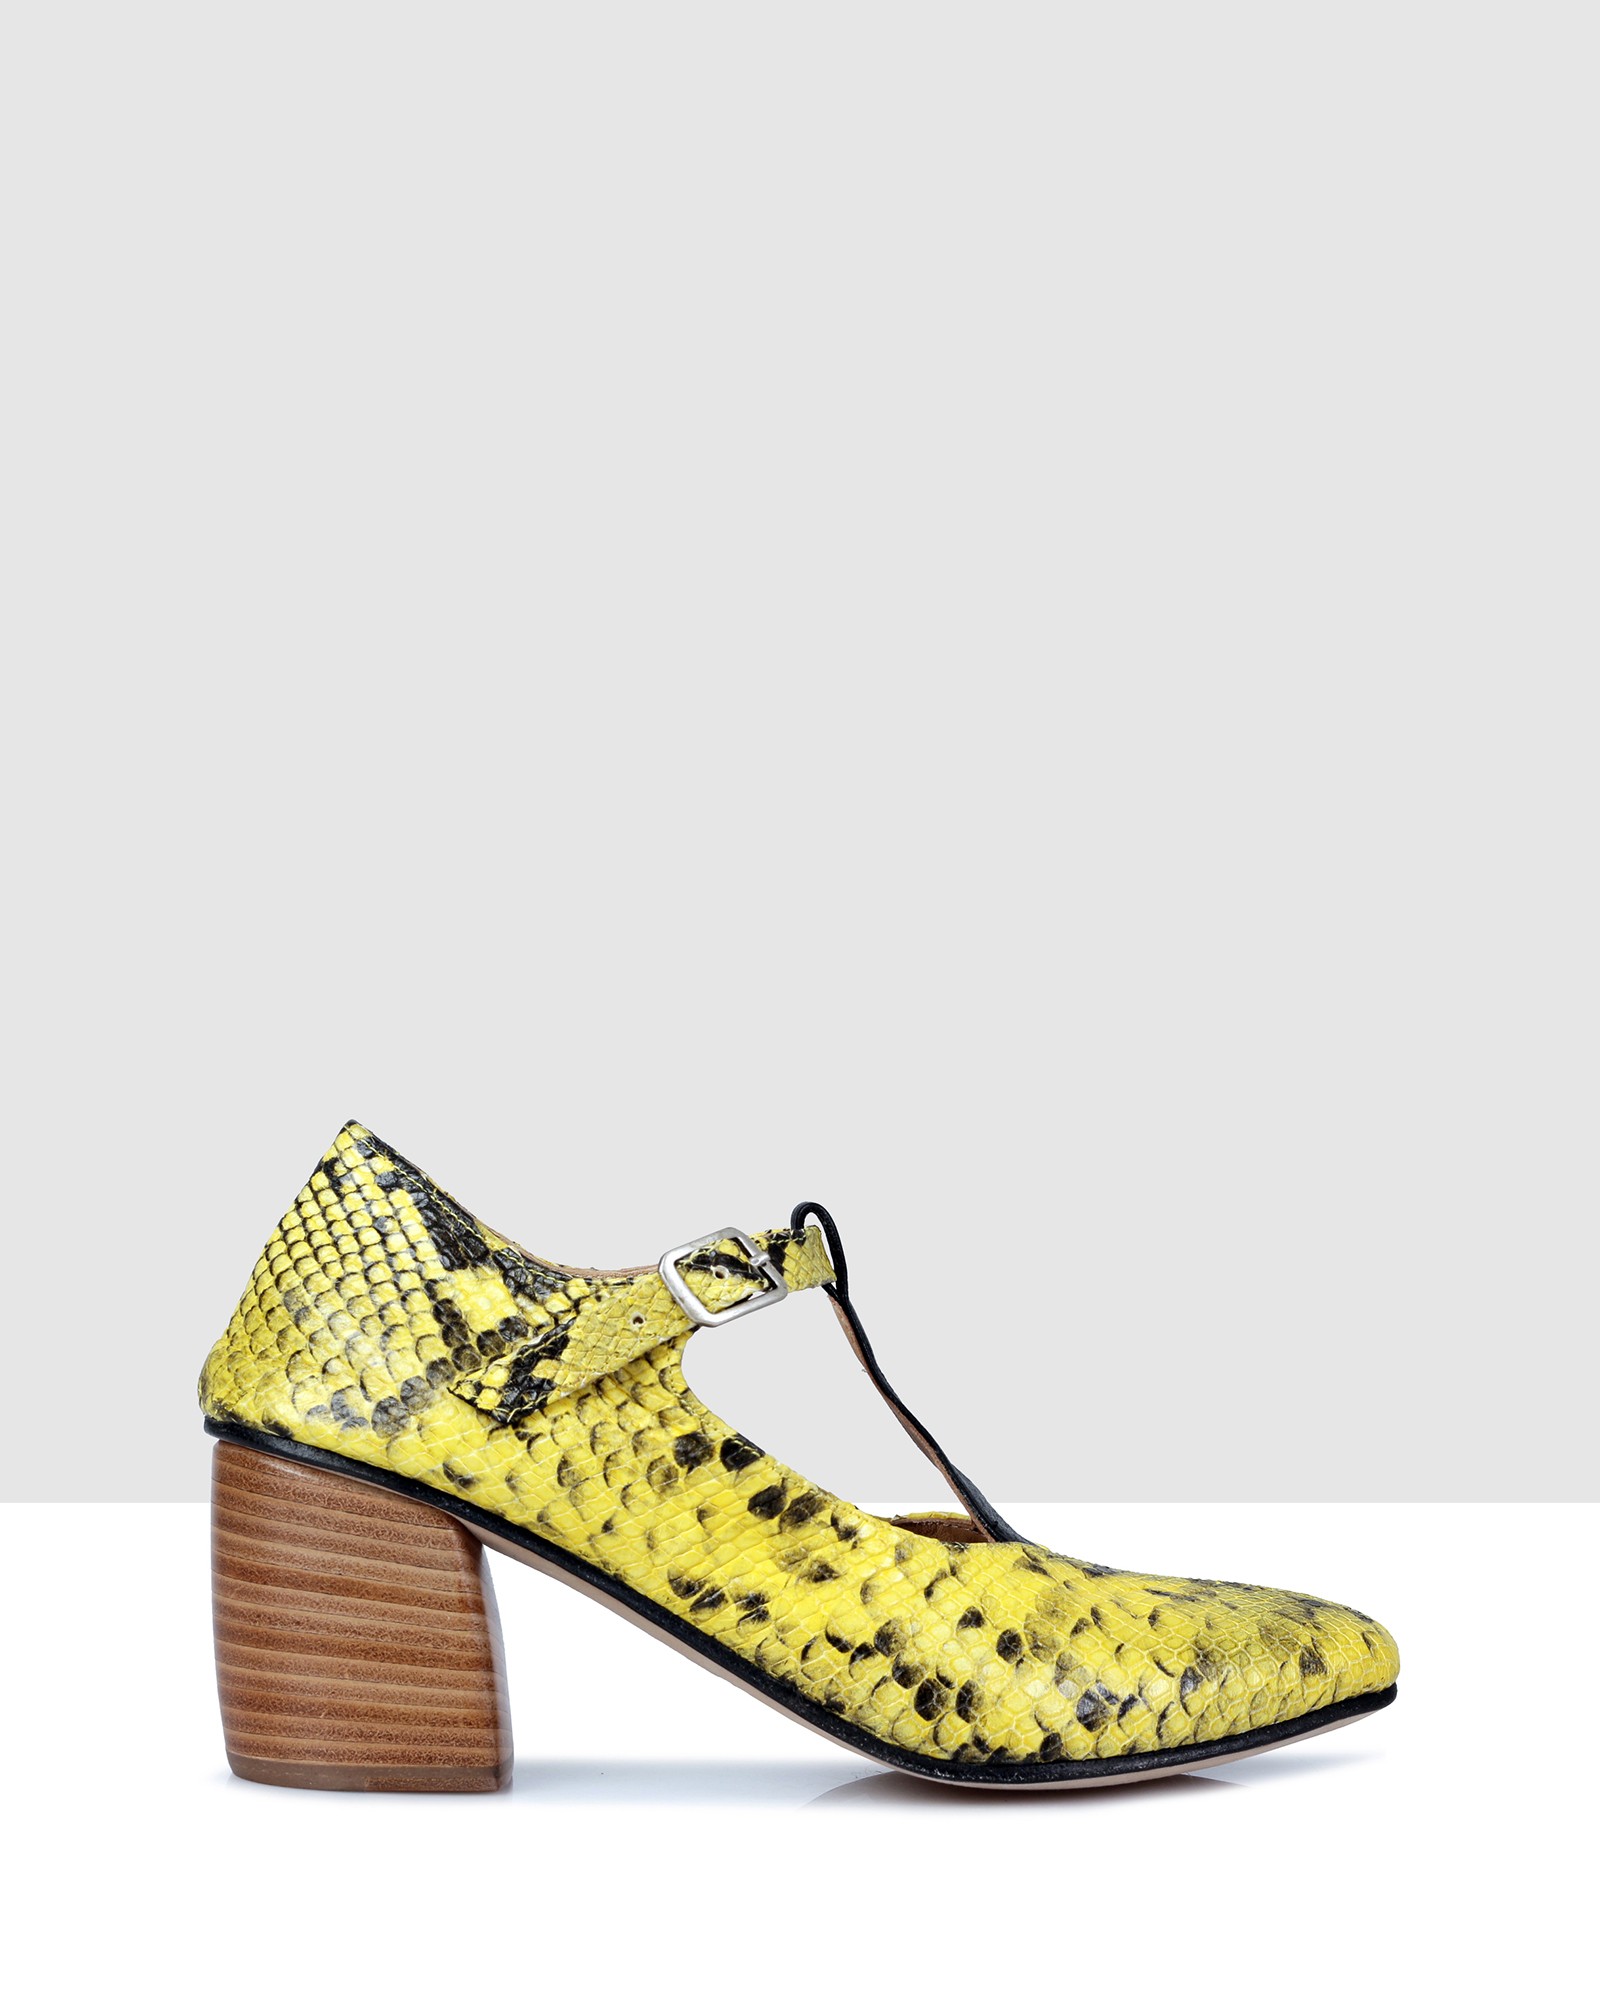 Olympia Courtshoes Yellow-Black by Sempre Di | ShoeSales